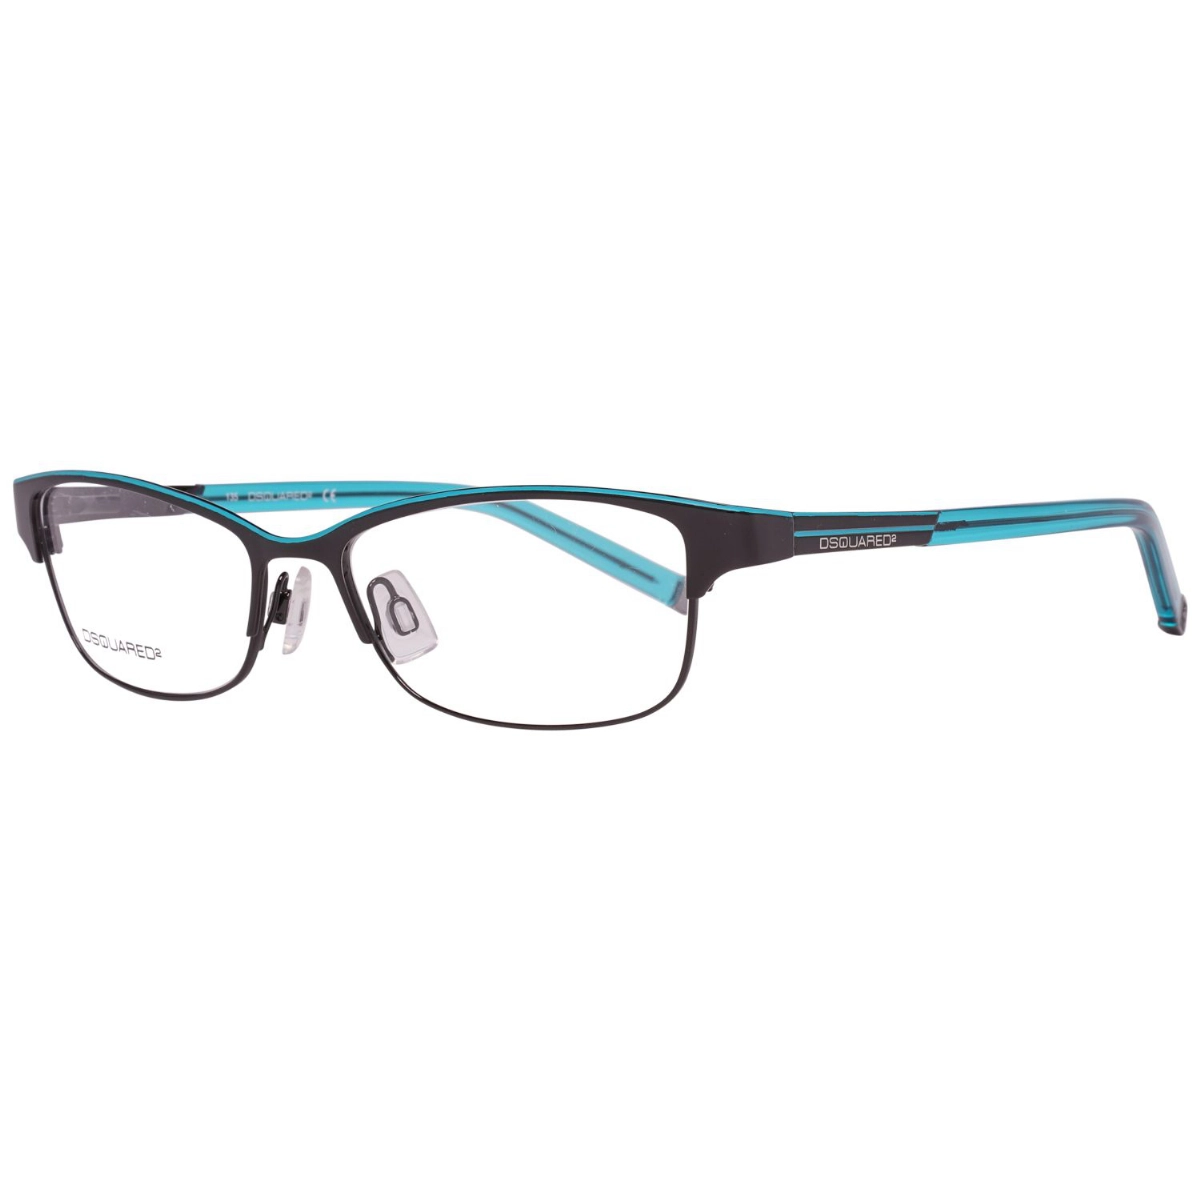 GLASSES FOR WOMAN DSQUARED2 DQ5002-002-51